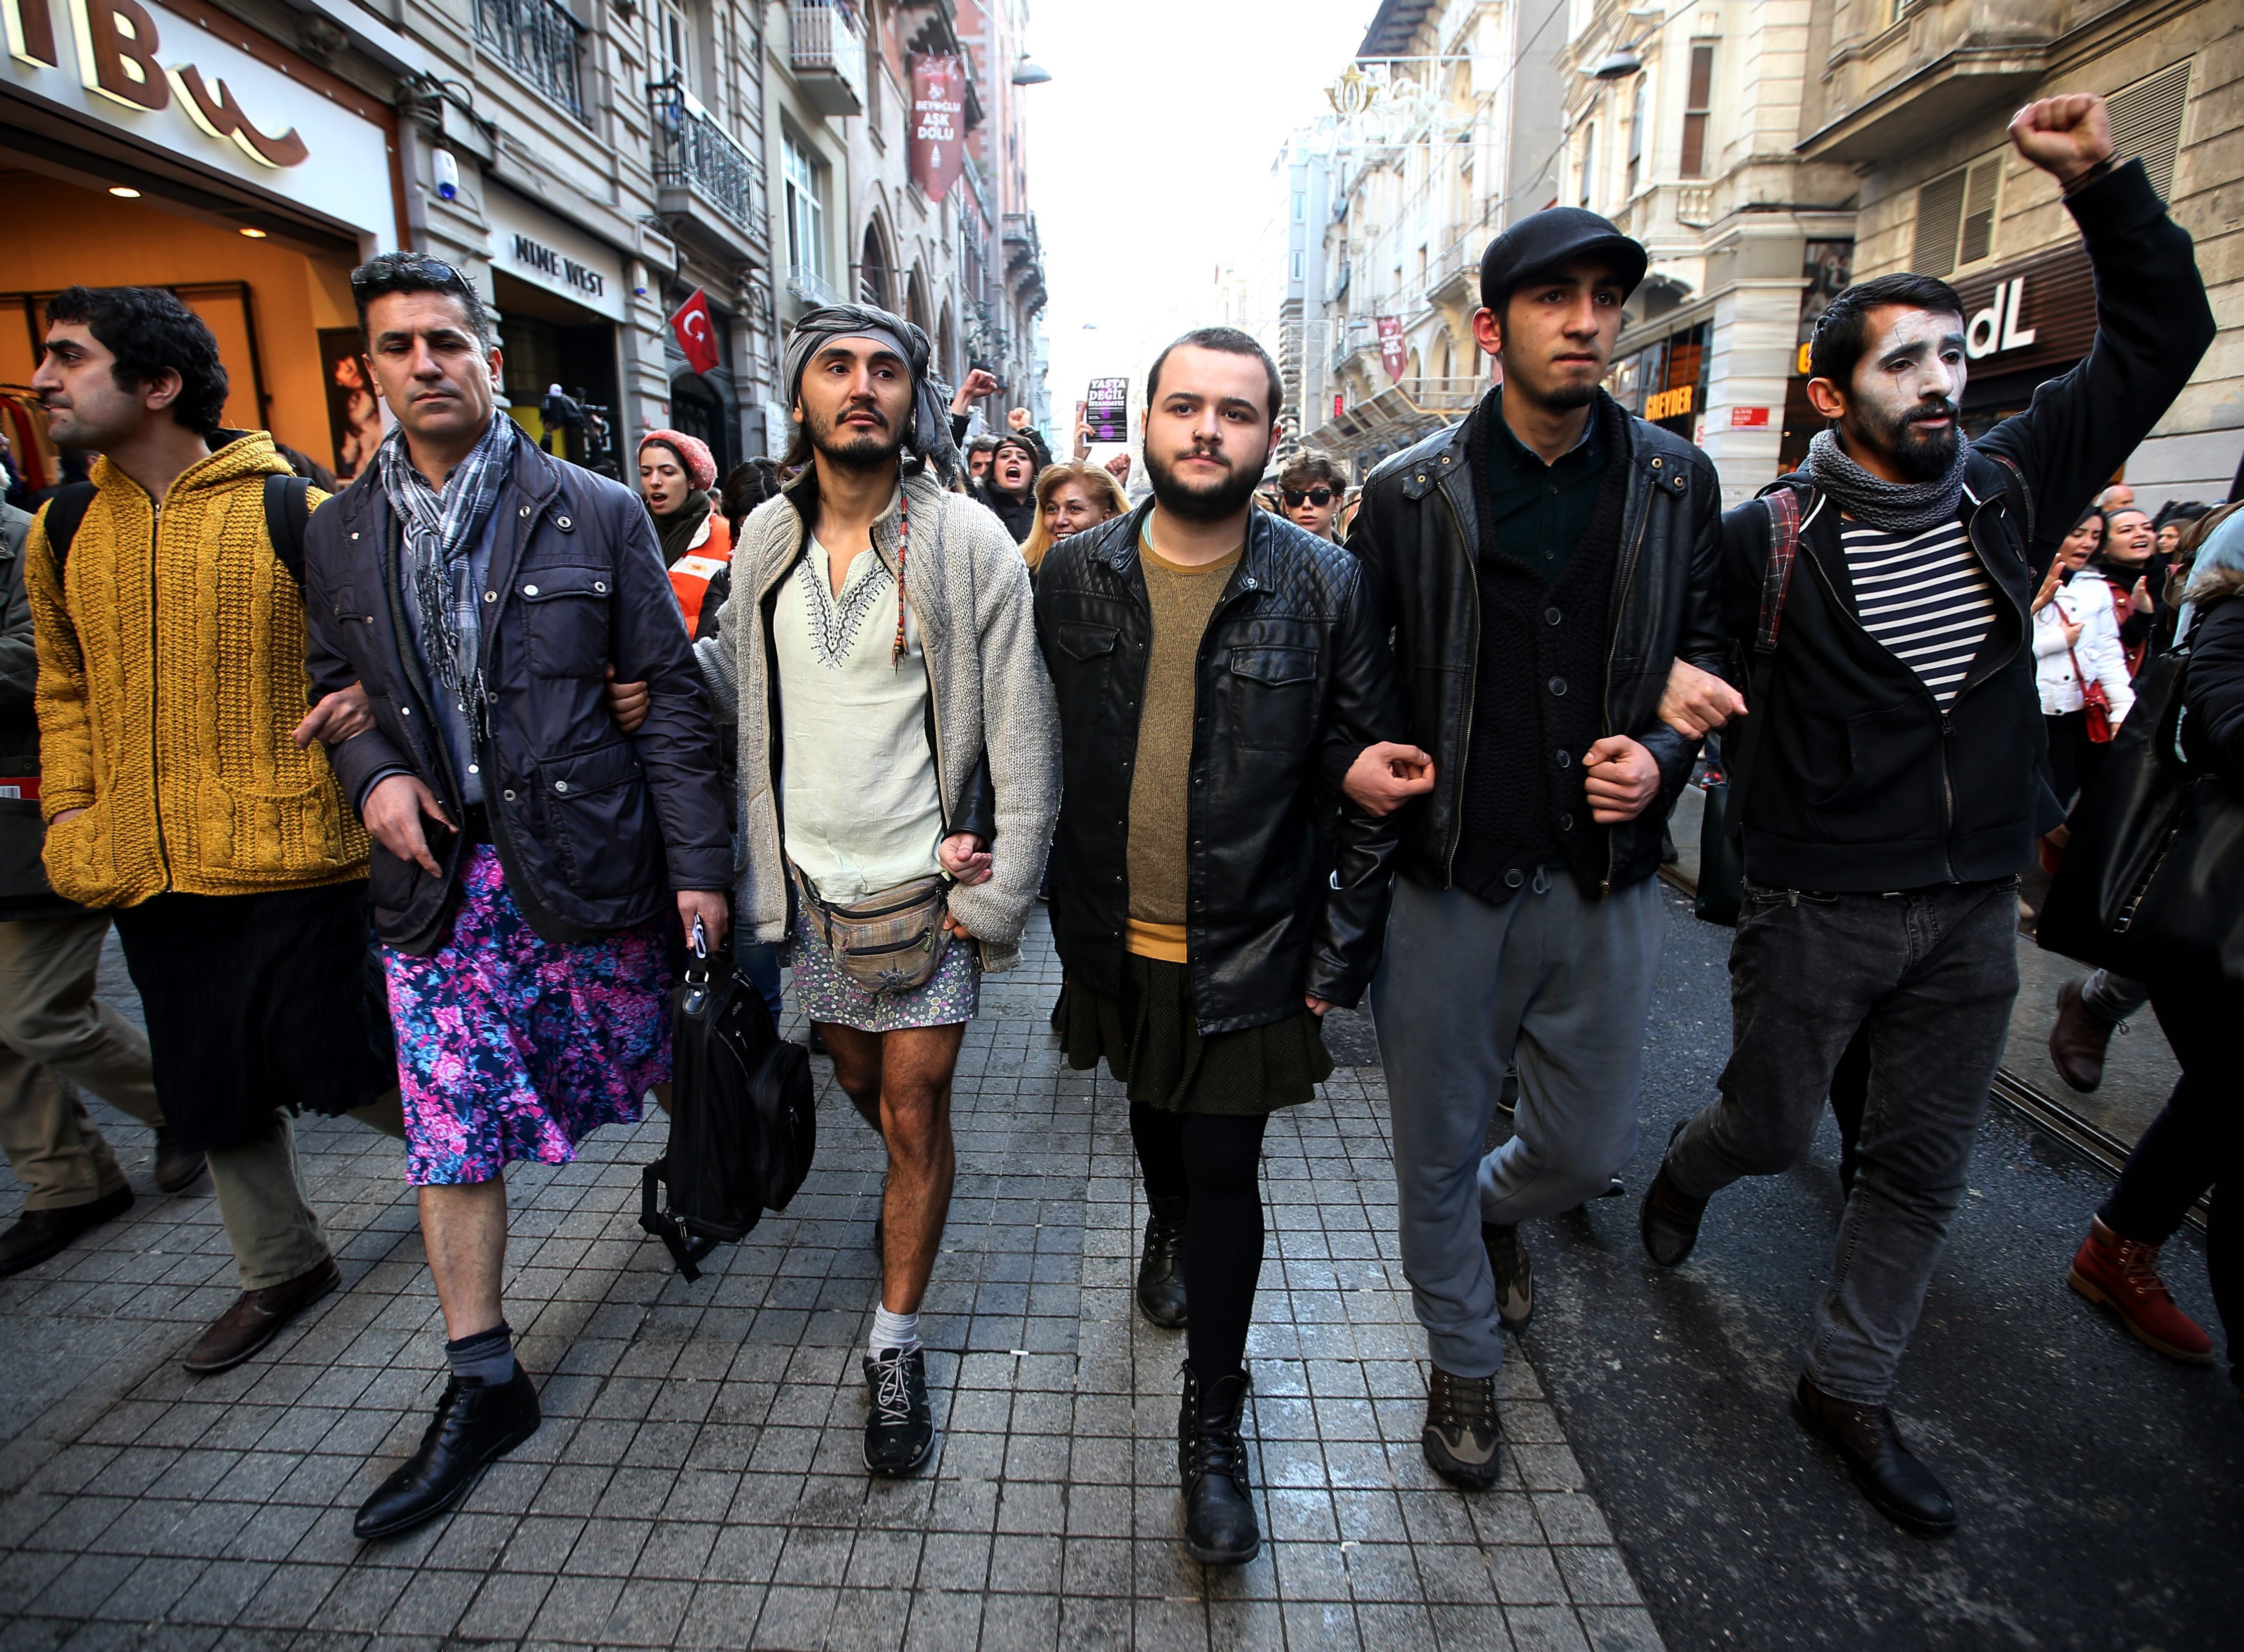 Some men wear skirts to show solidarity with women who have been protesting against violence against women since the recent murder of Ozgecan Aslan, a 20-year-old woman, during a march in Istanbul on Feb. 21, 2015. (Emrah Gurel&mdash;AP)